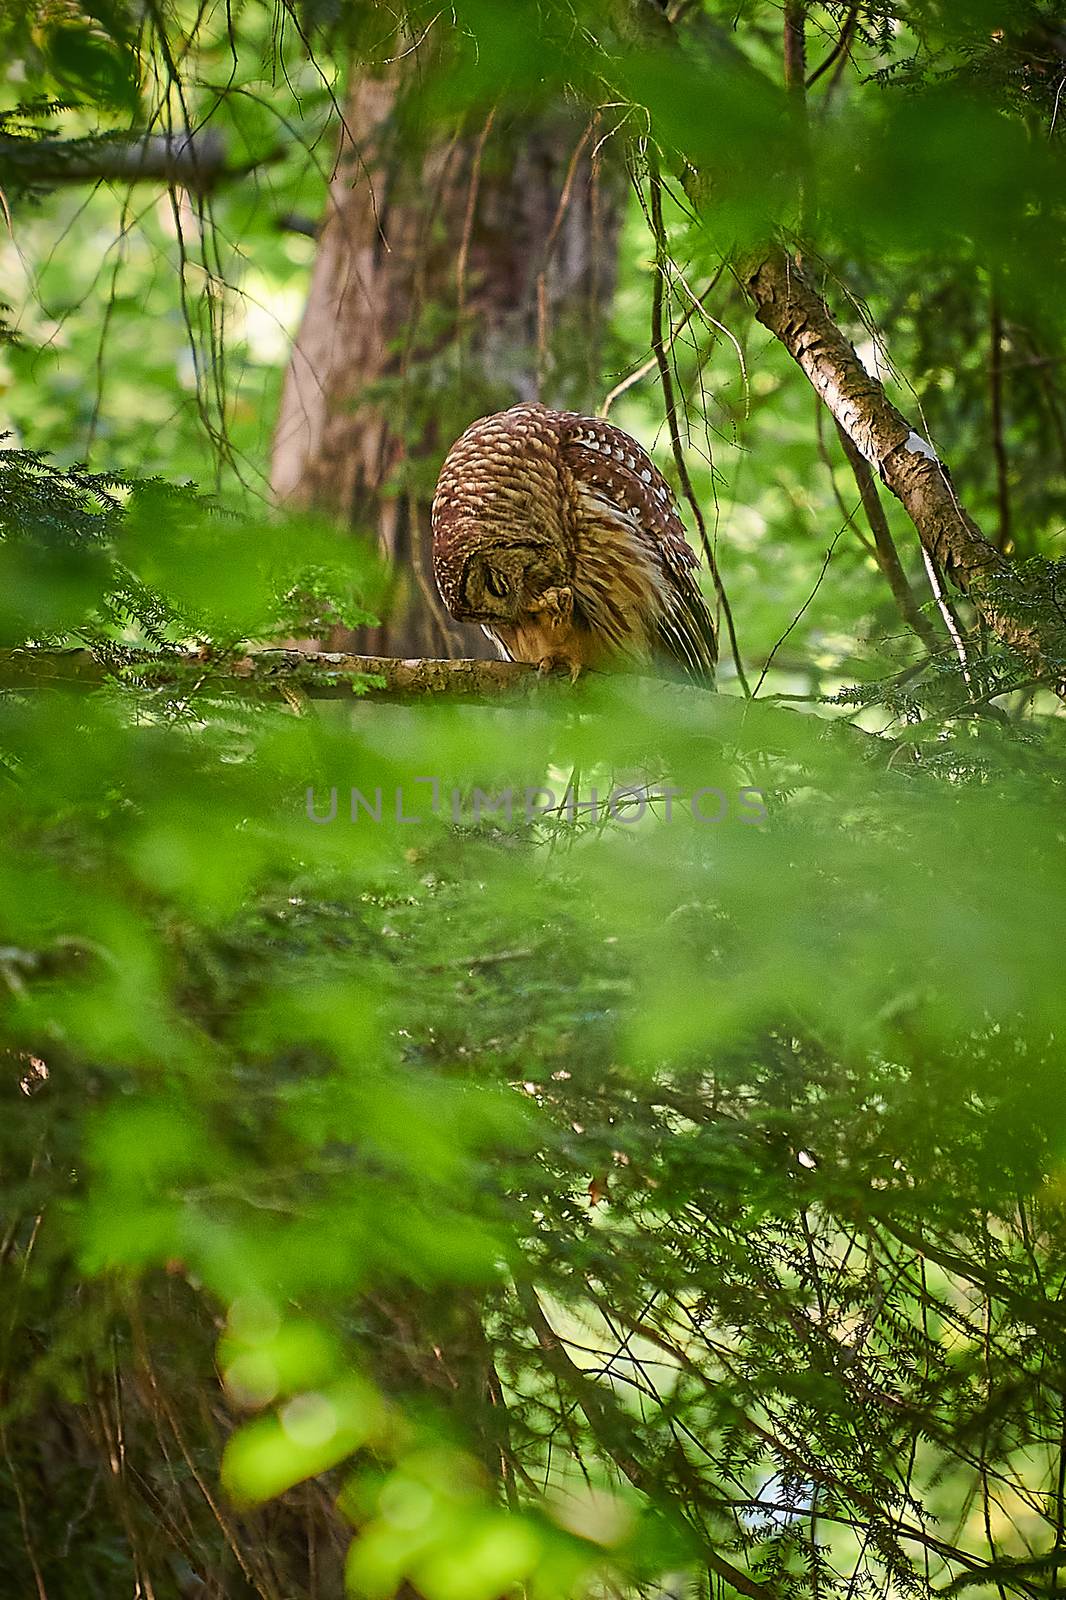 Adult Barred Owl eating a small captured pray. by patrickstock